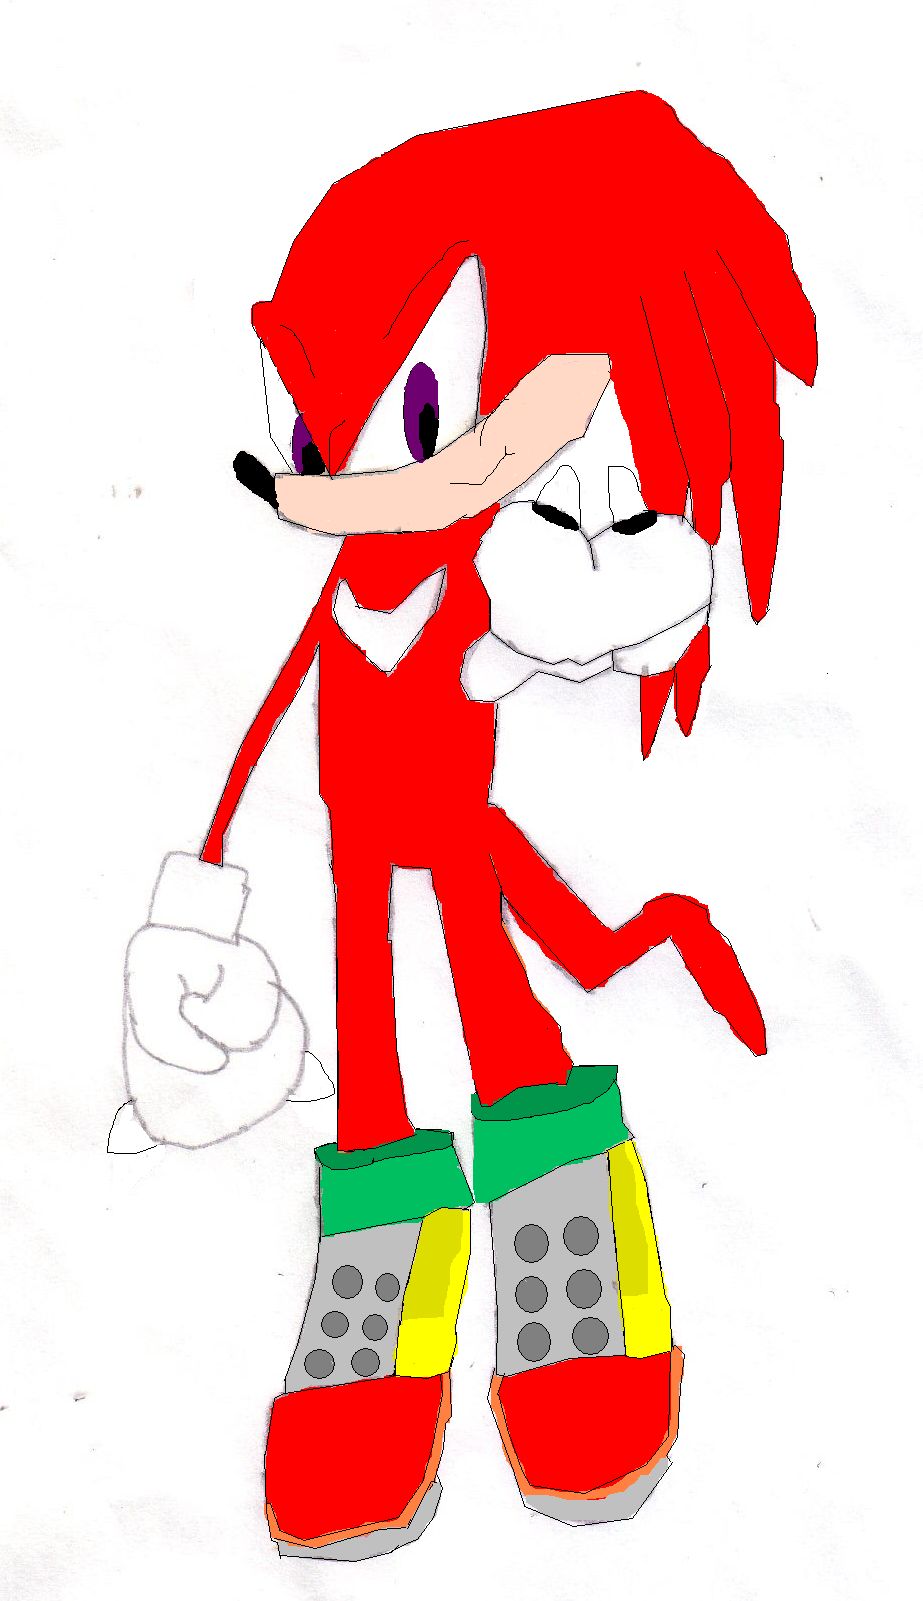 Knuckles The Echidna in a Cool Pose by ginathehedgehog